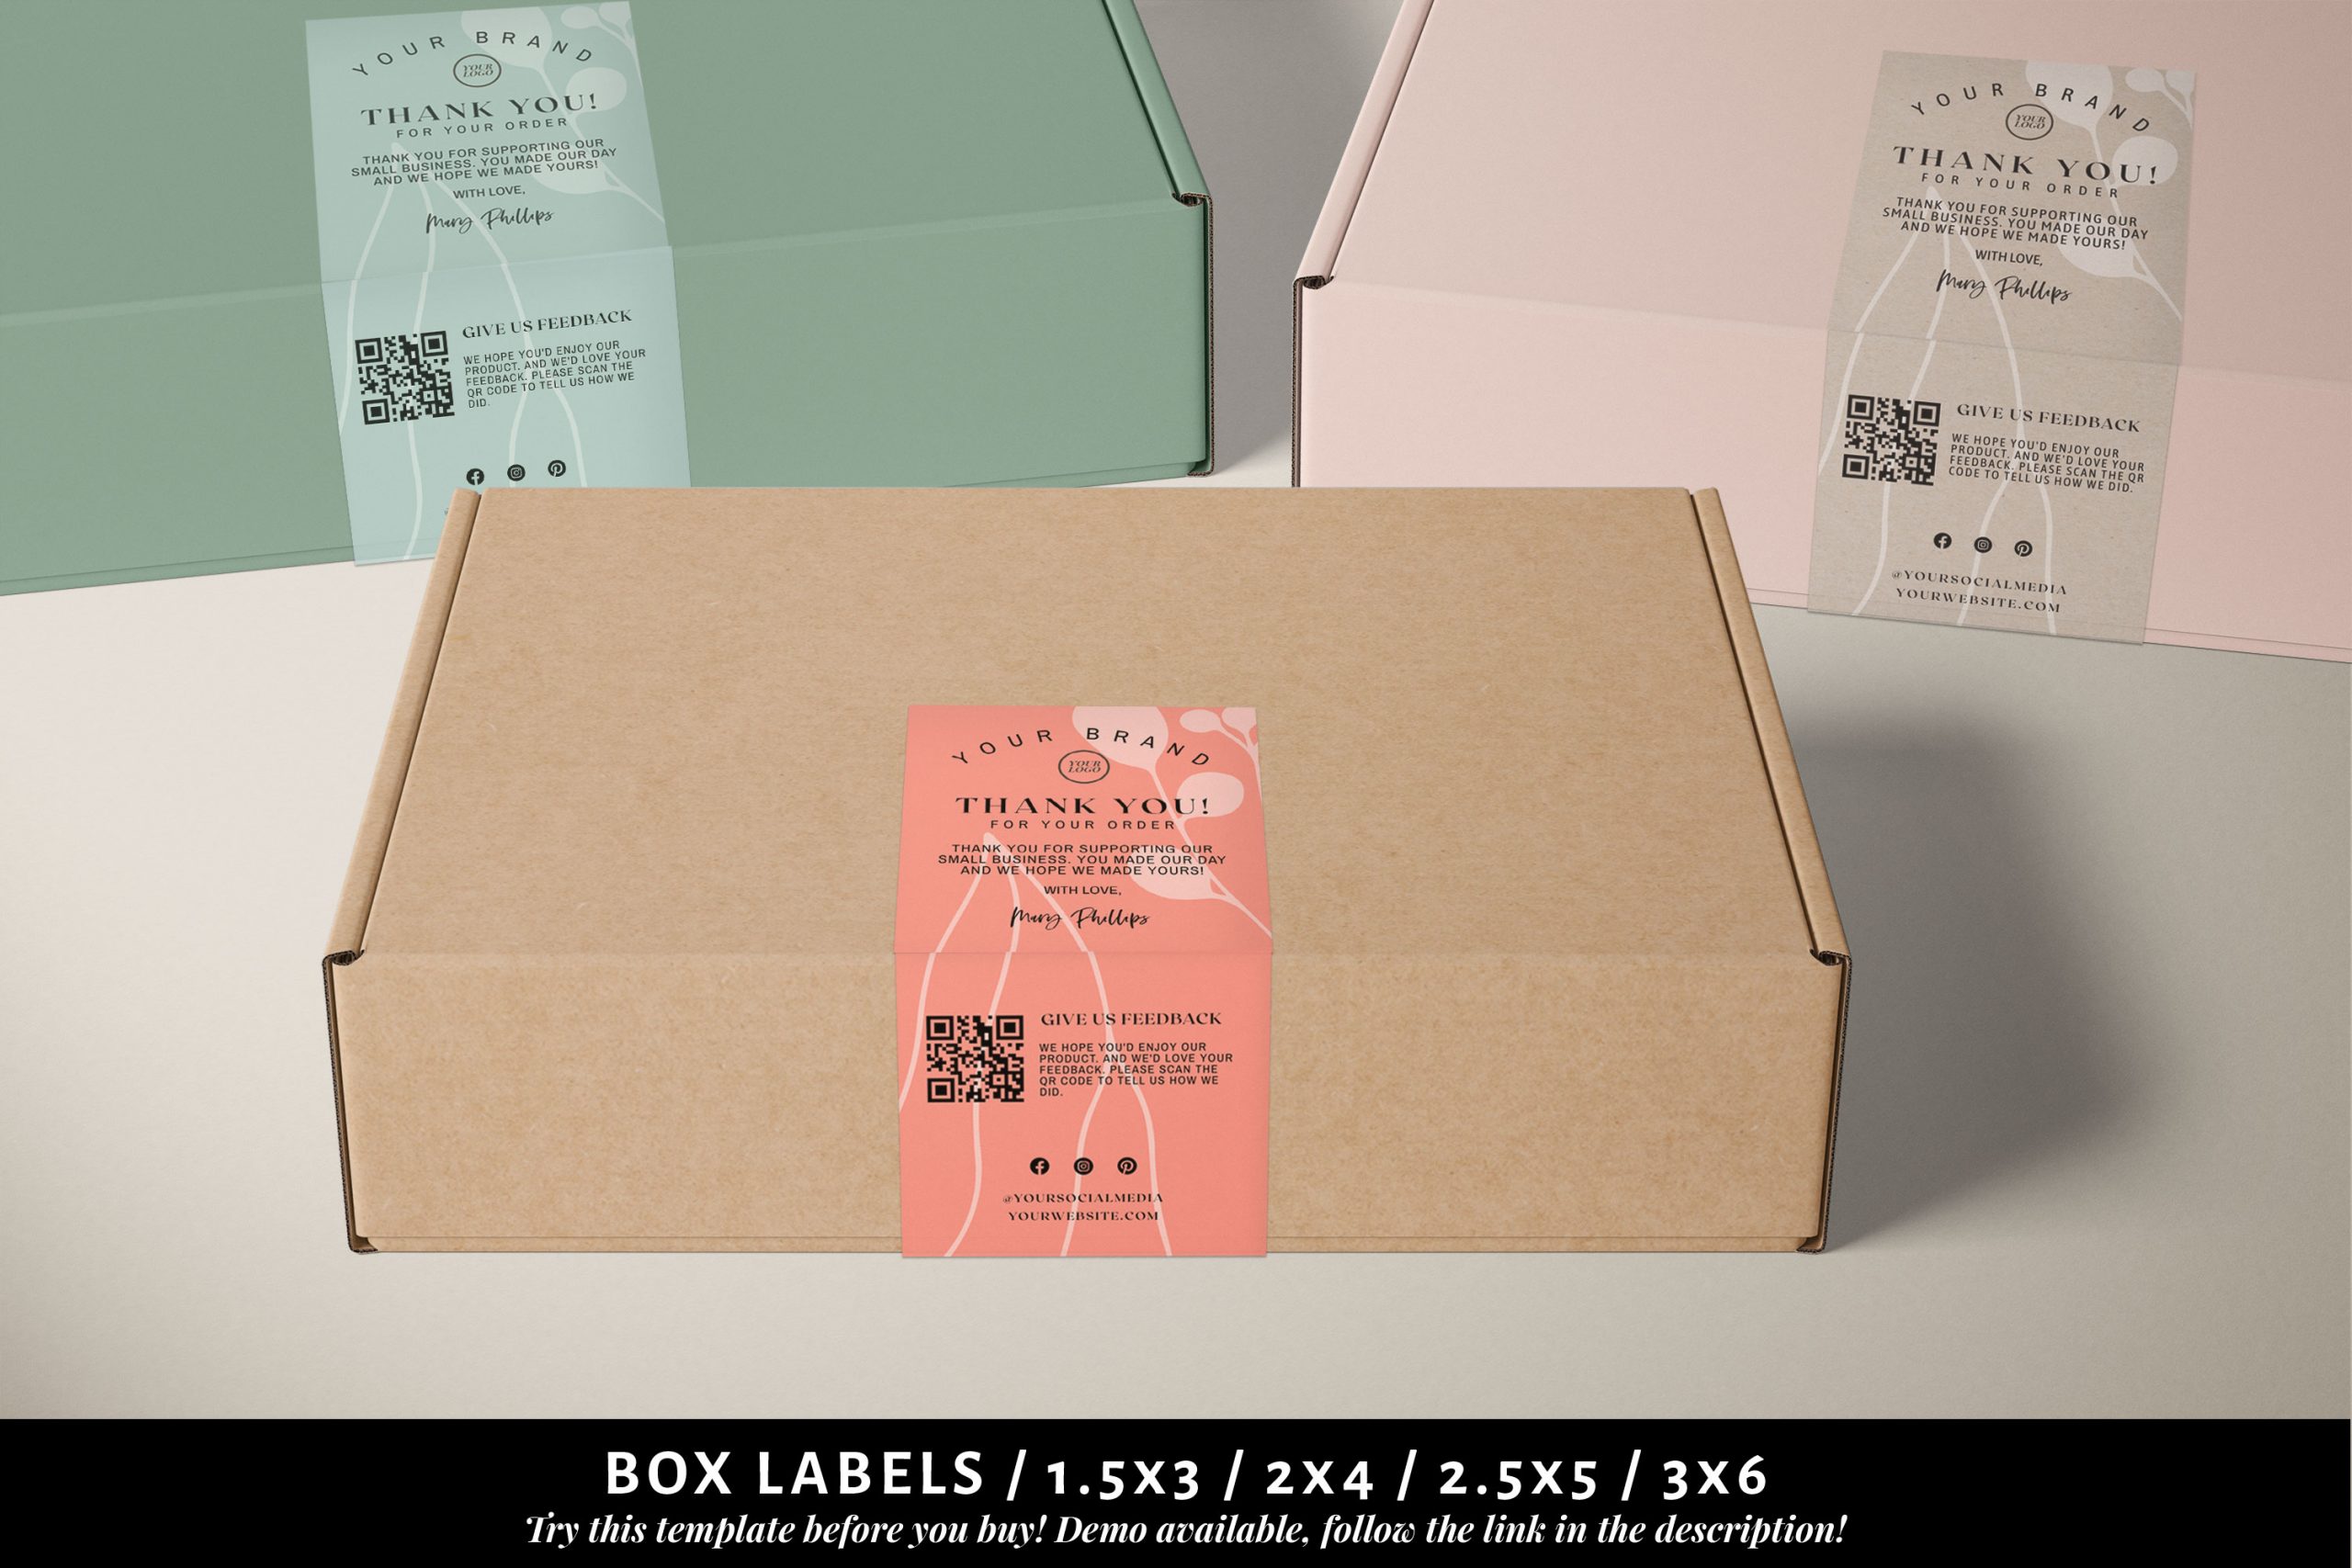 container seal labels